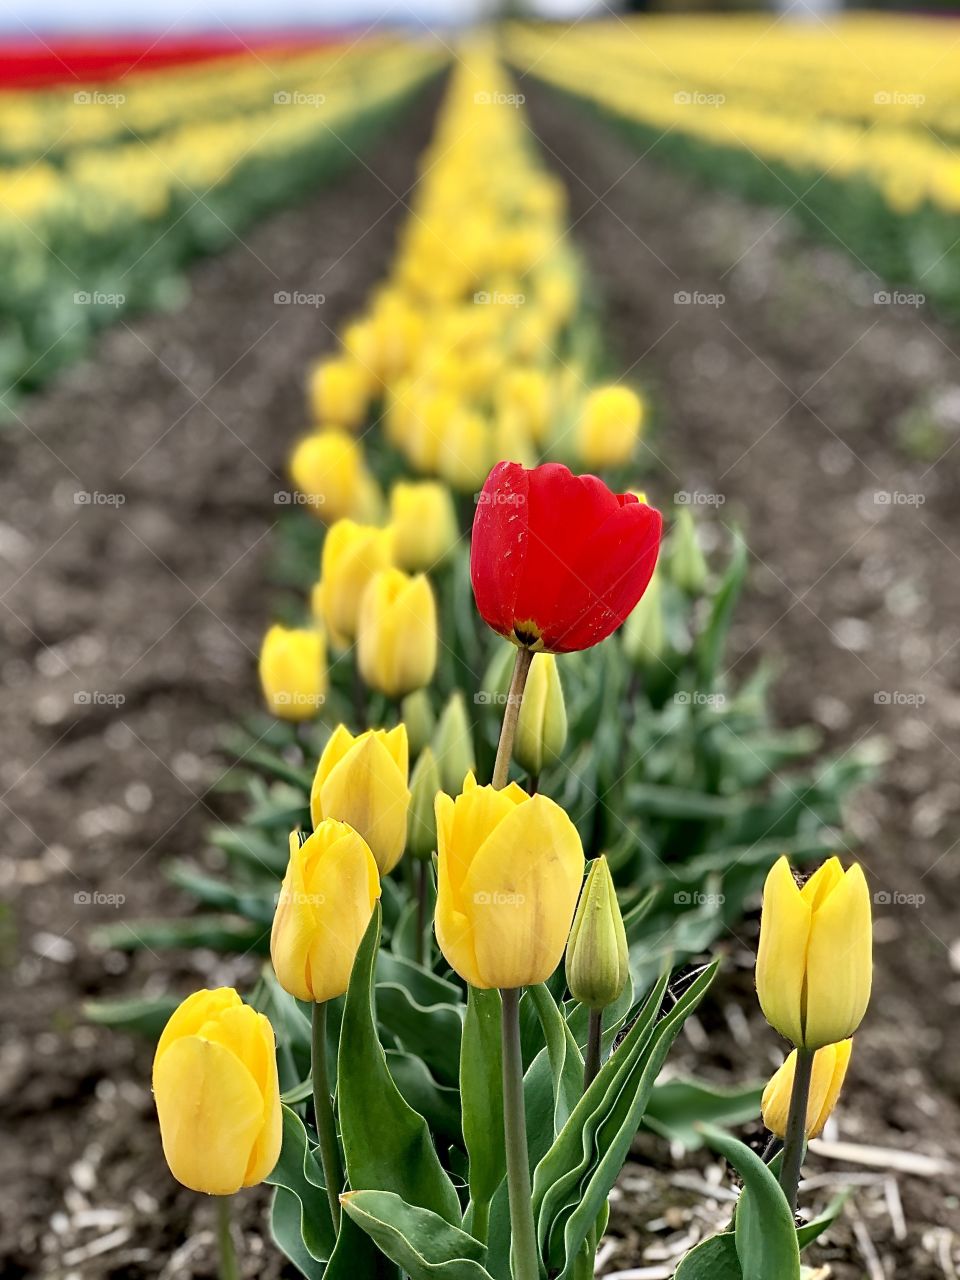 Foap Mission “Colors Of Spring”! One Solitary Red Tulip In A Spring Field Of Yellow Tulips!